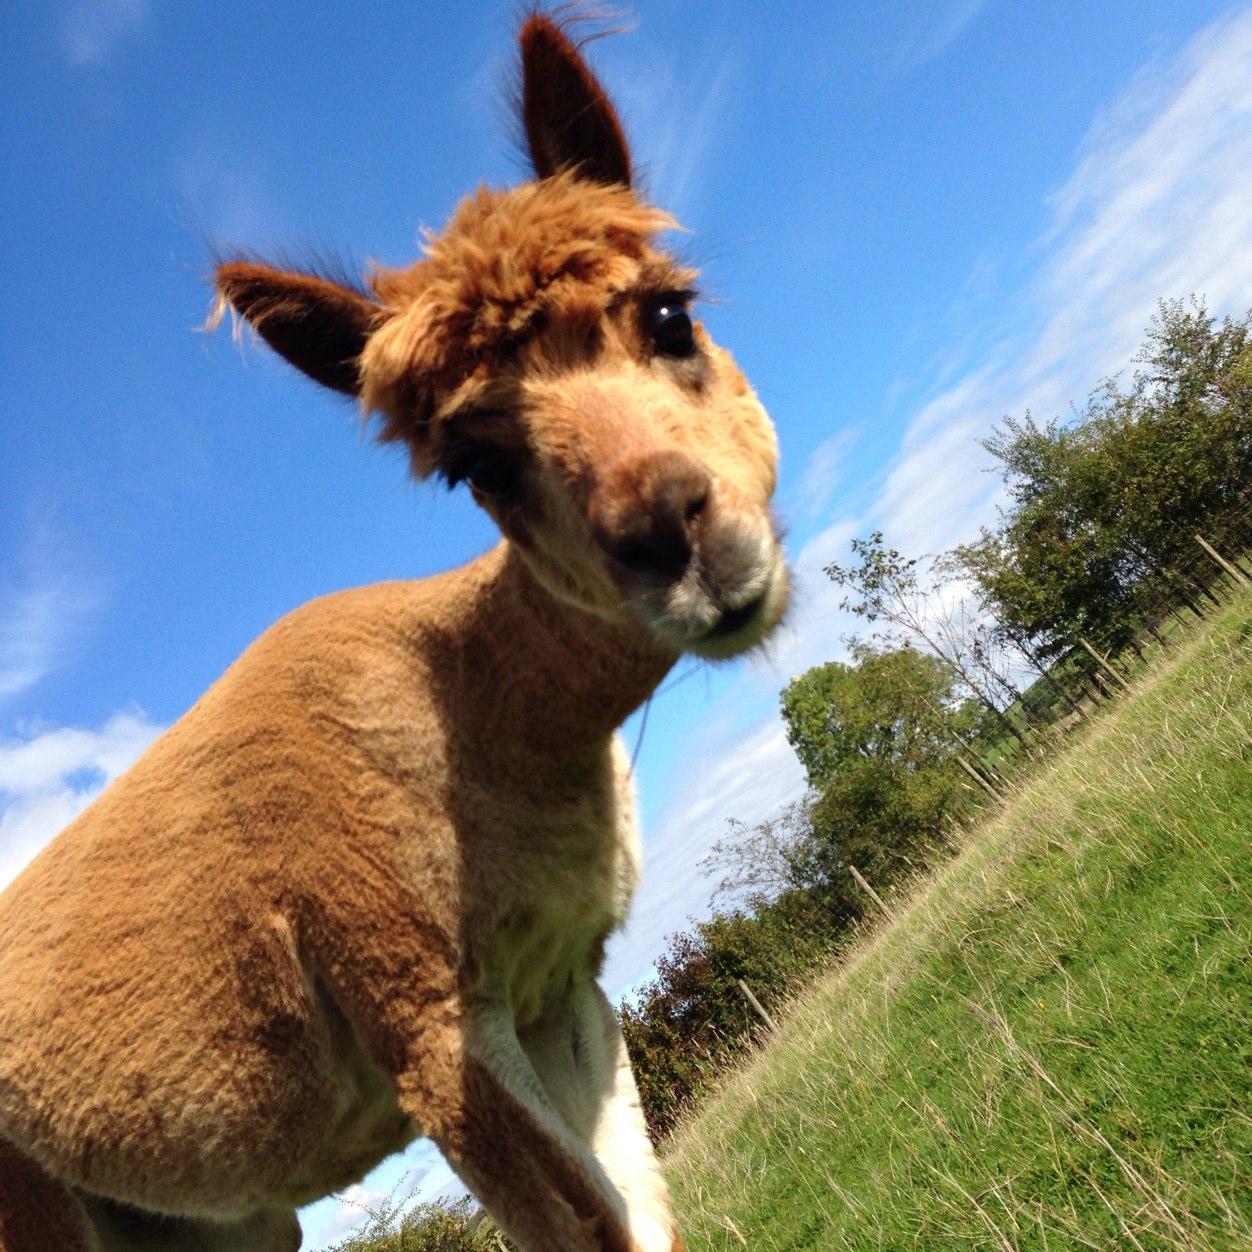 Established in spring 2000, the WhyNot Alpacas herd now numbers more than ninety alpacas. Livestock sales & alpaca products from socks to duvets on our website.